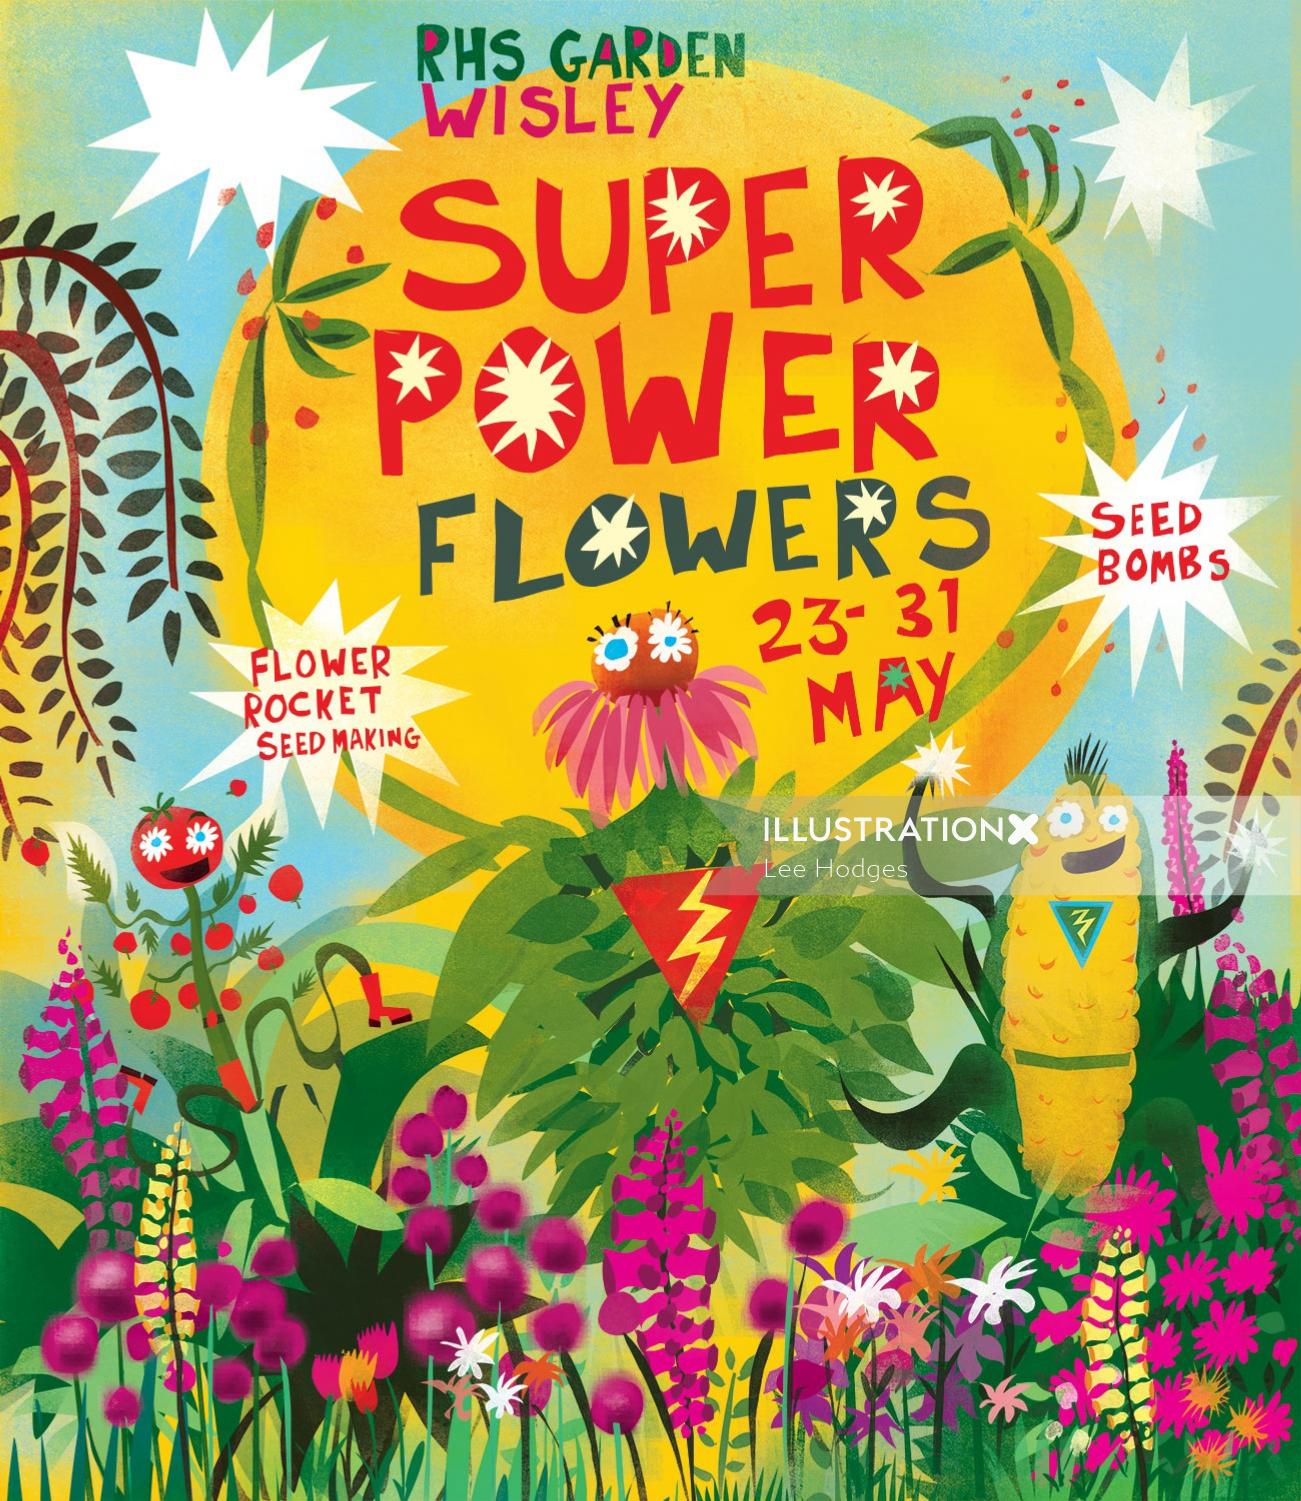 Illustration for super flower powers poster by Lee Hodges